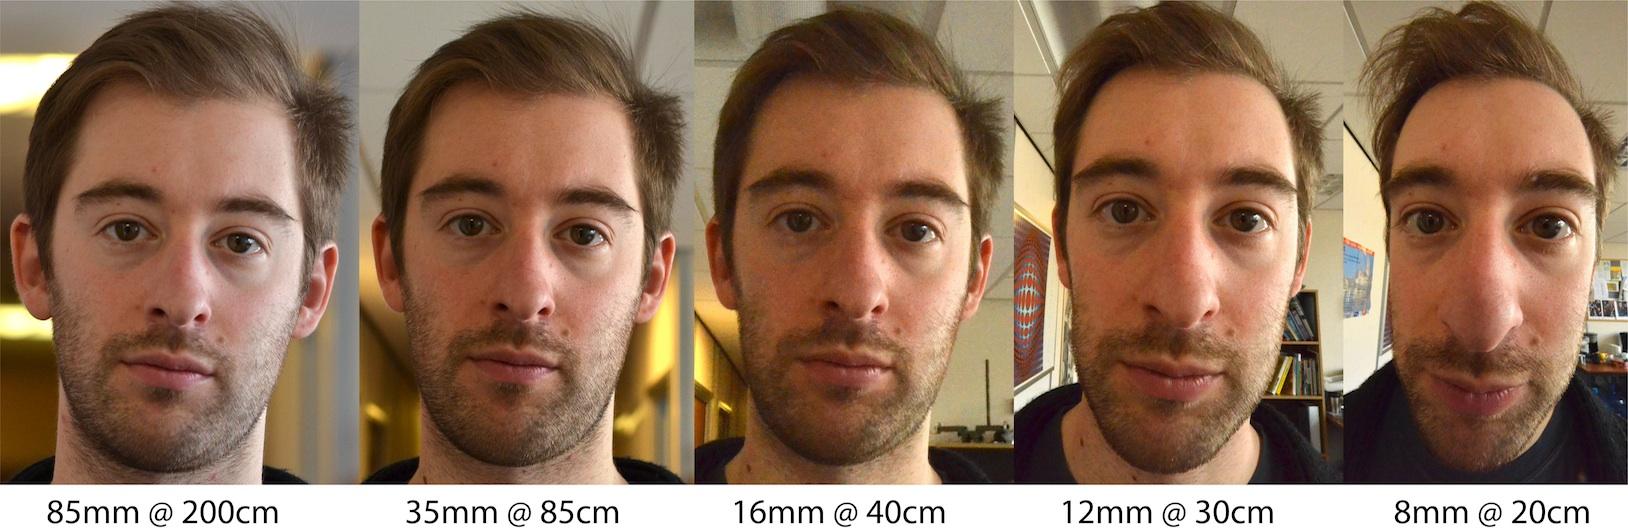 Camera distortion makes you look different in pictures than in real life